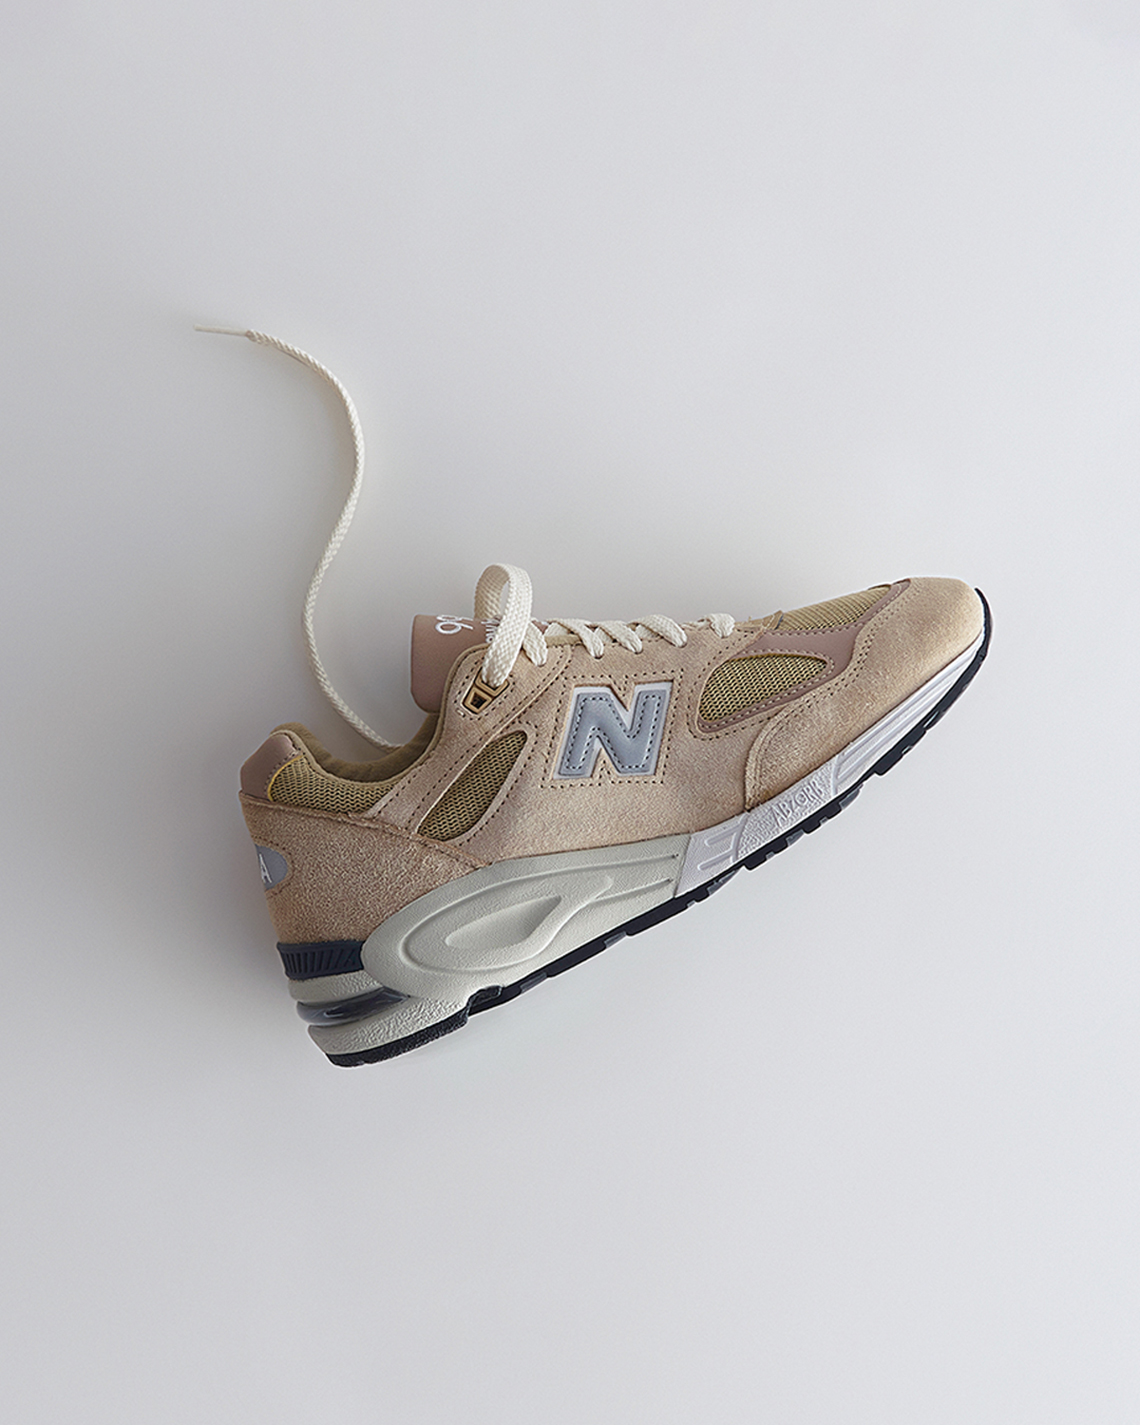 Kith Stone Island and New Balance are expanding their partnership with two new Tan 1